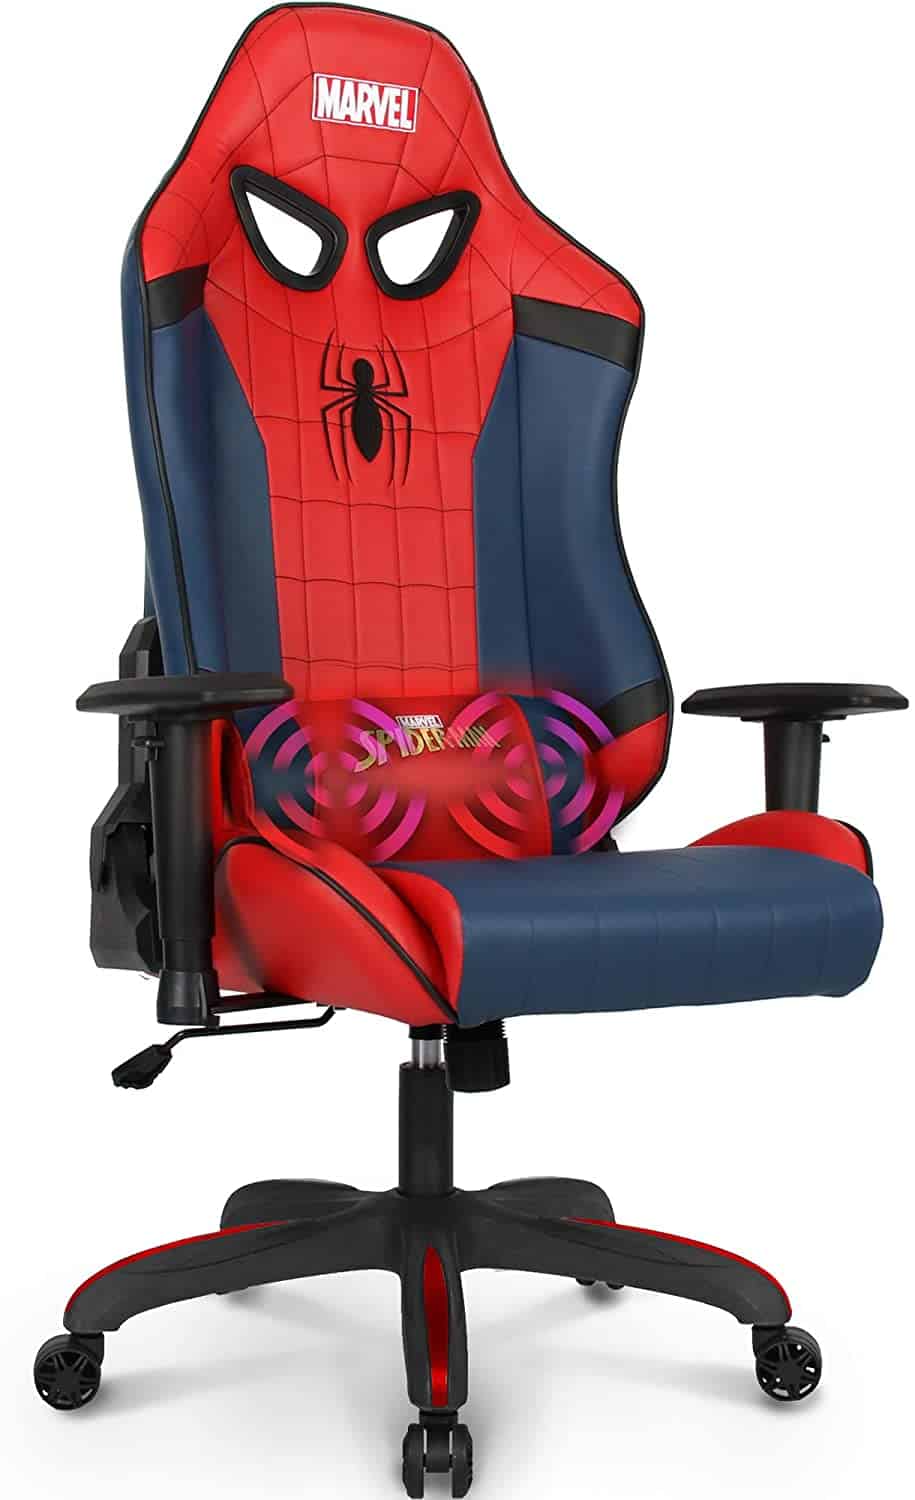 Marvel gaming chair